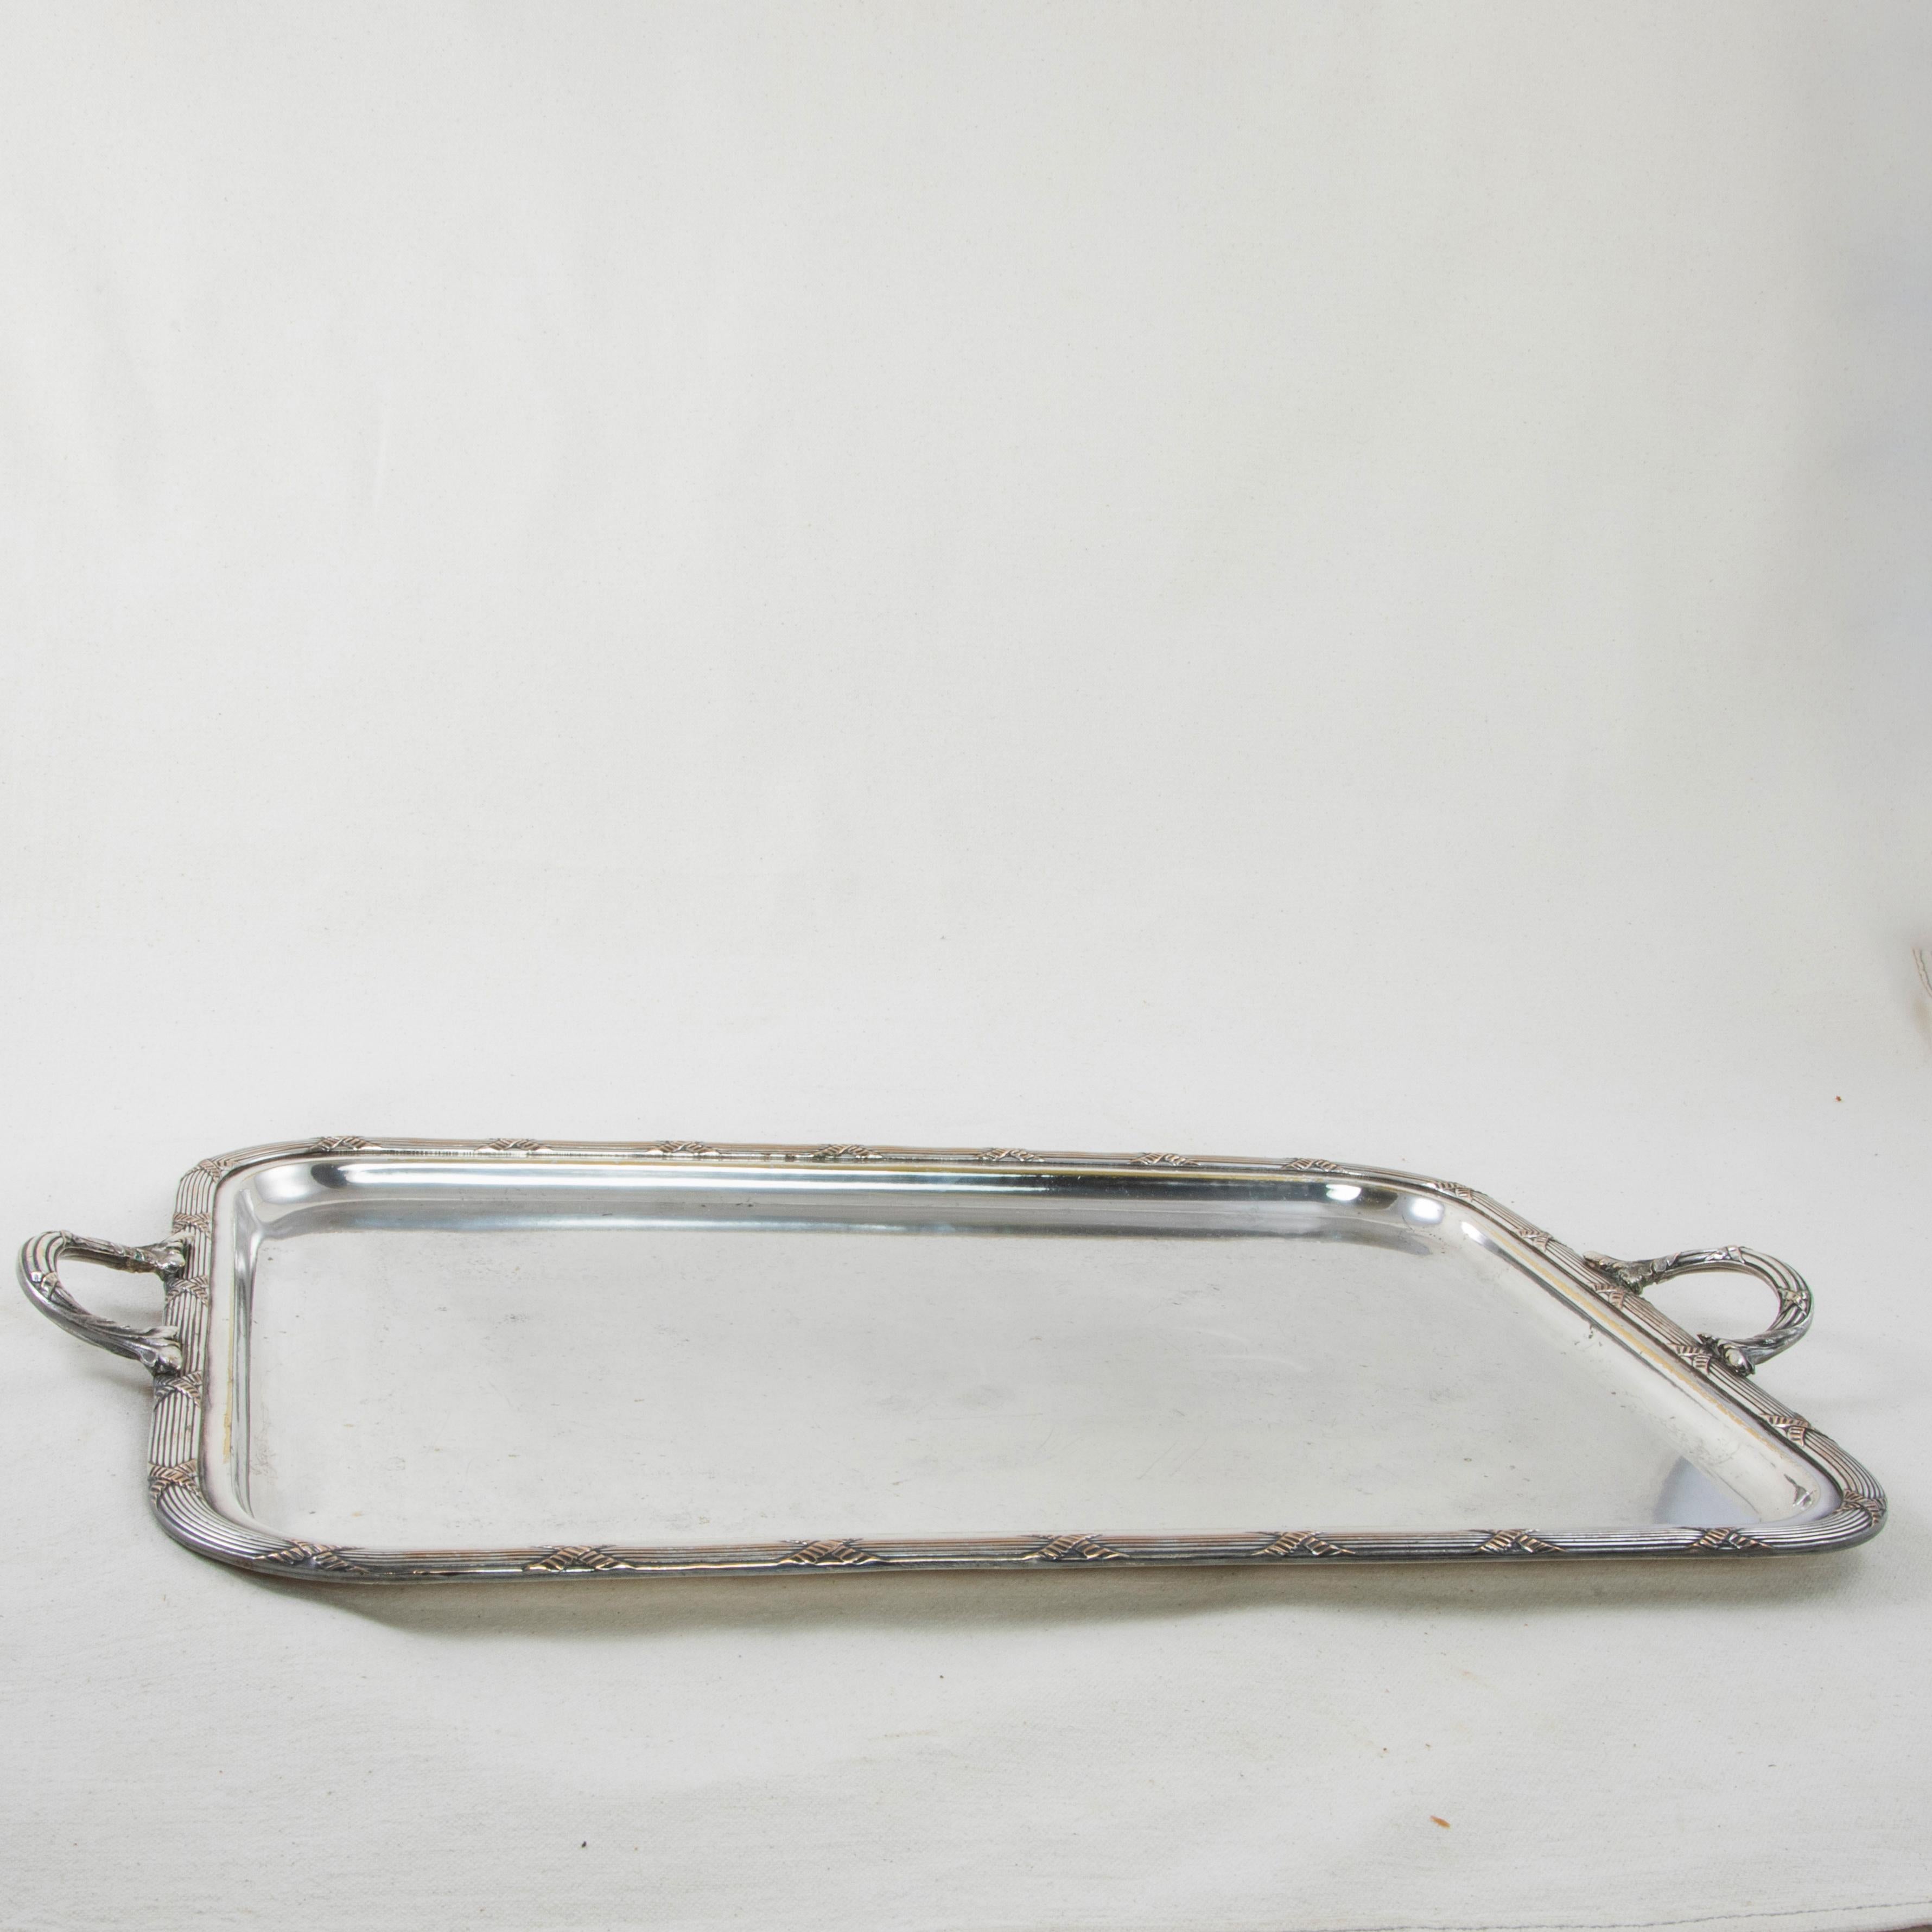 This early 20th century French silver plate serving tray features a raised rim with a classic Louis XVI motif of crossed ribbons. A handle at each end repeats the crossed ribbon motif with stylized leaves at the joints. The tray has three hallmarks